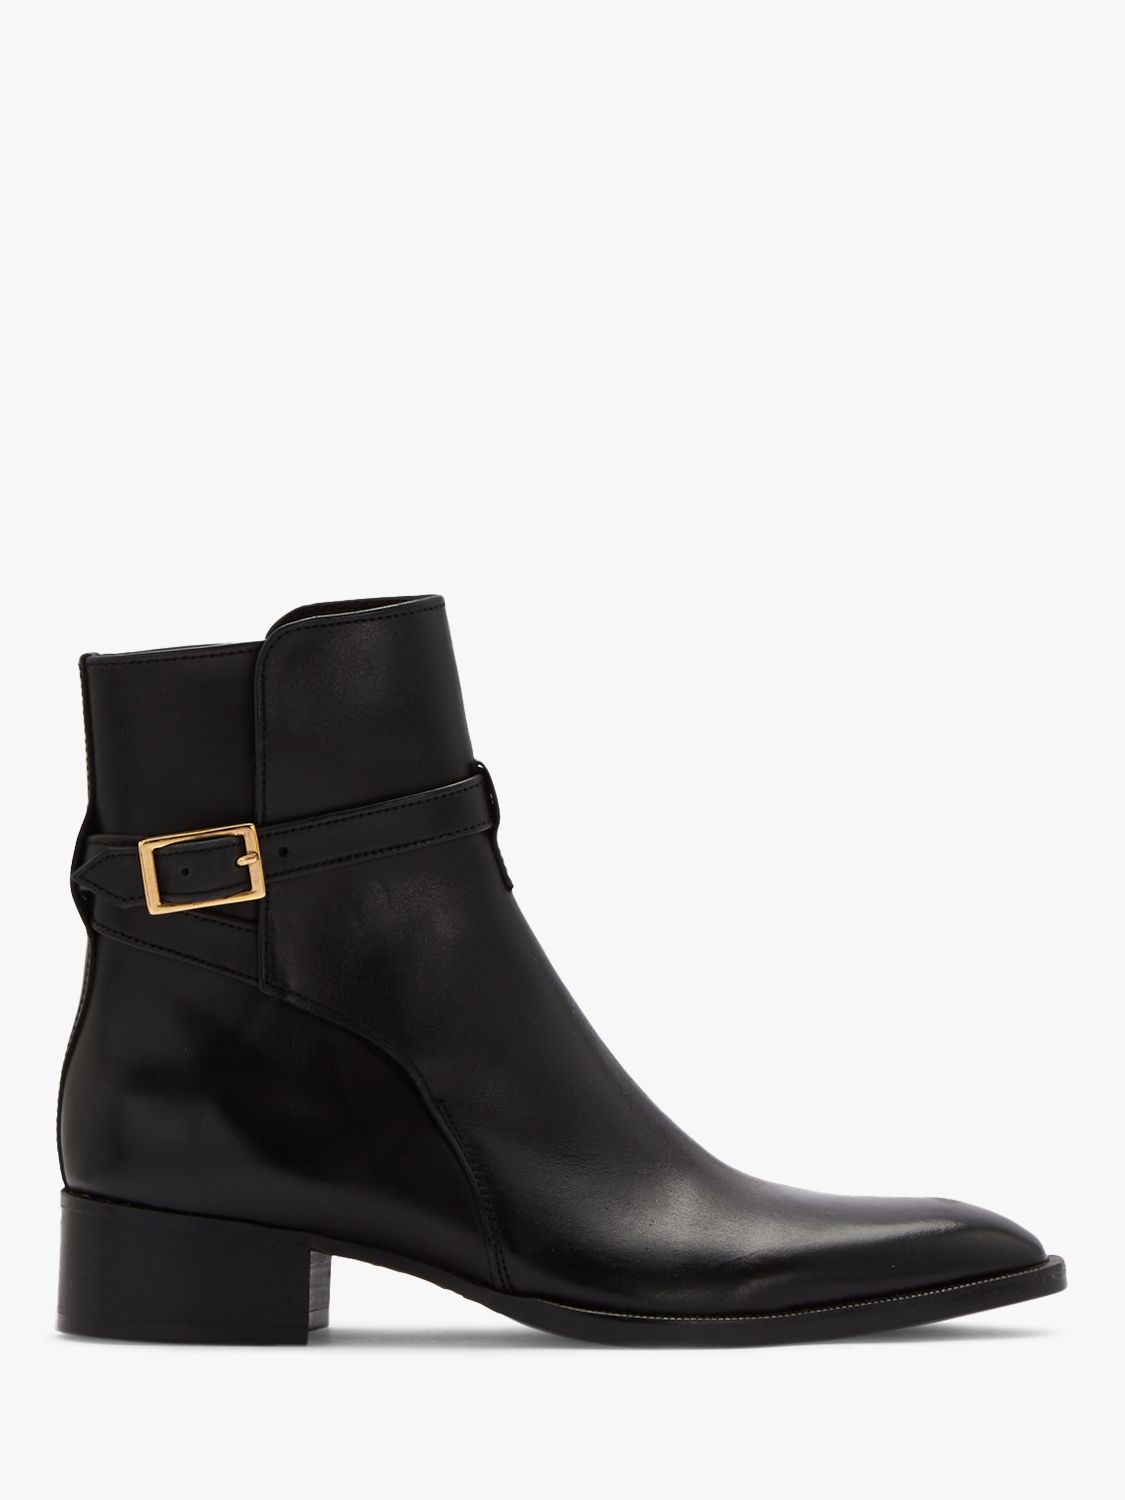 Jigsaw Sloan Leather Riding Ankle Boots